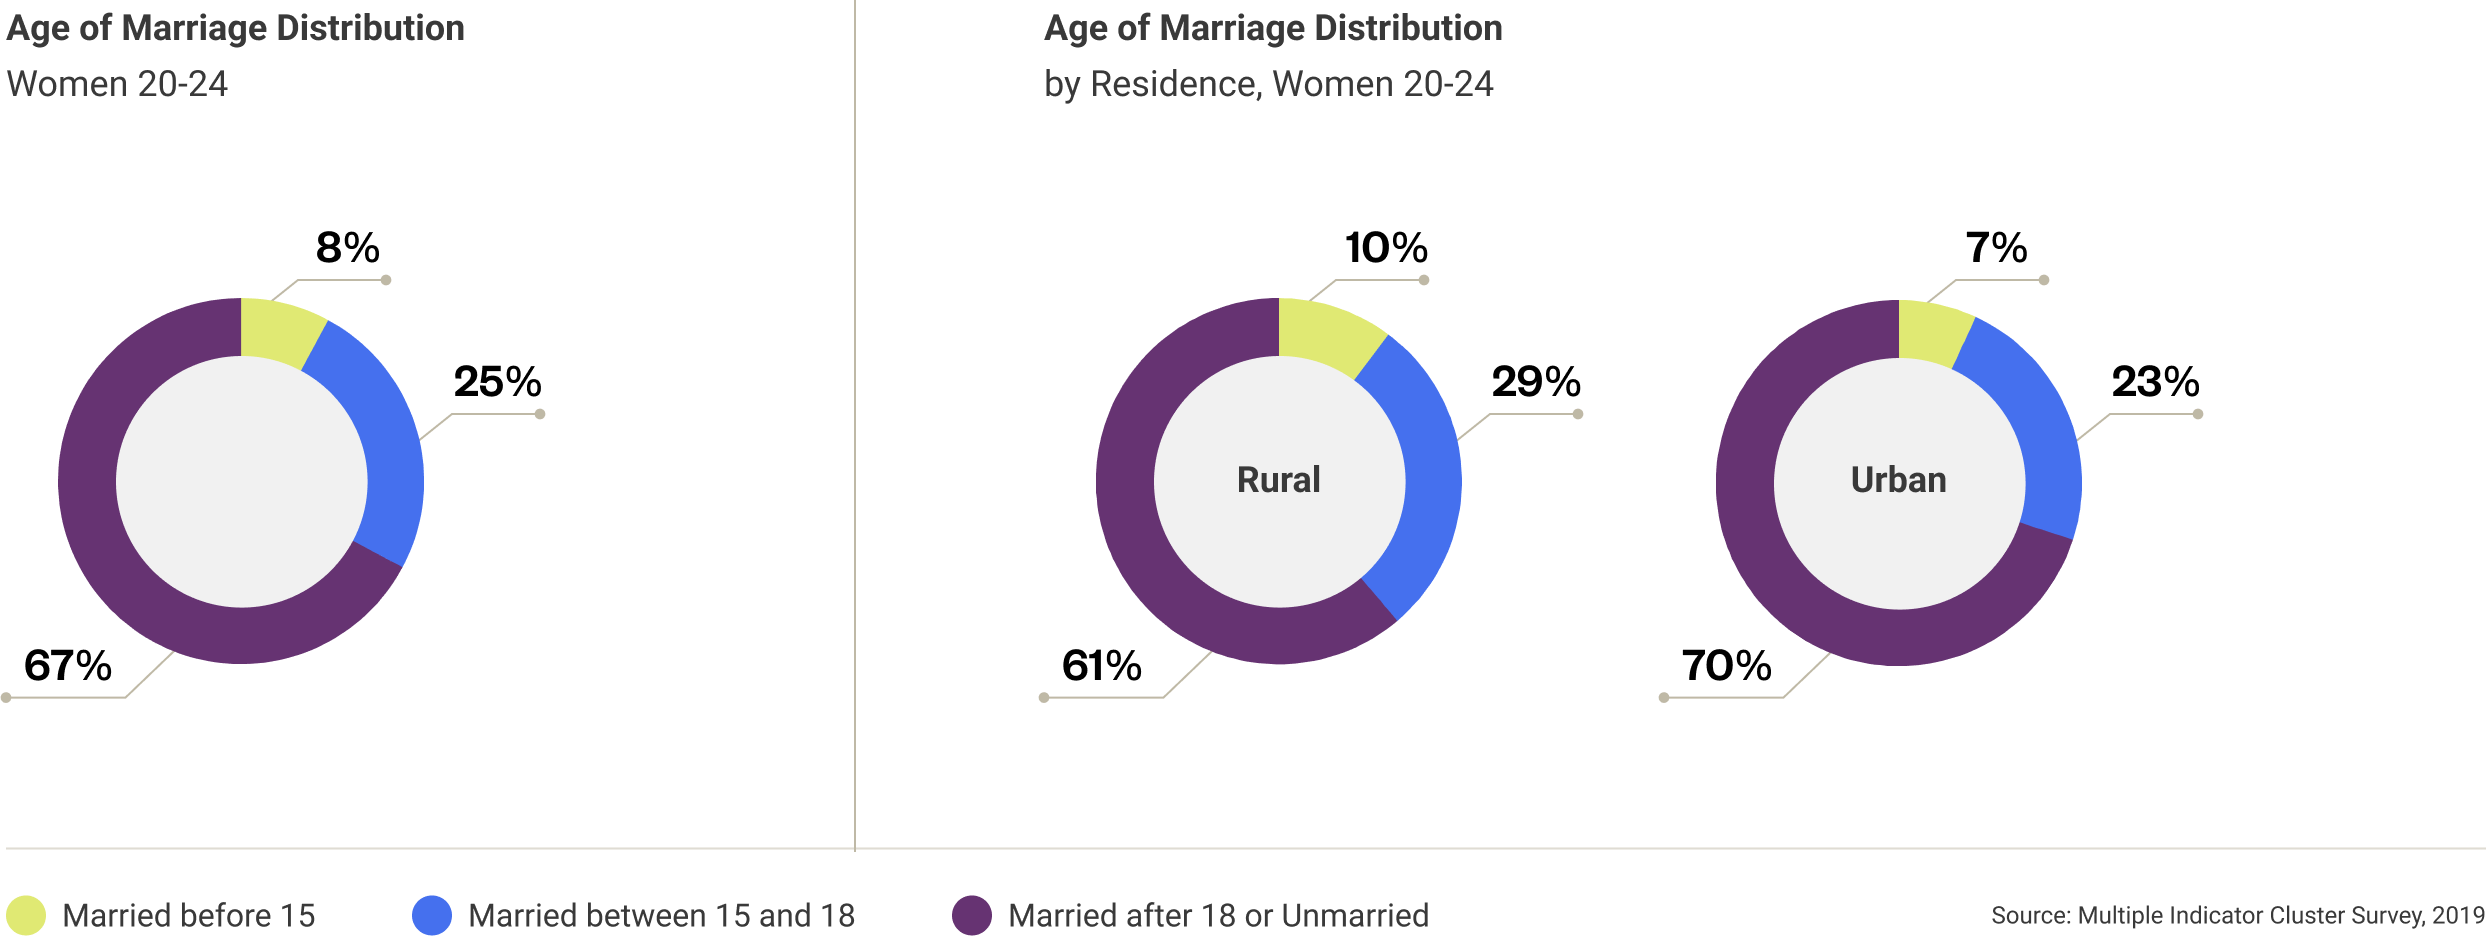 nepal-age-of-marriage-distribution-1